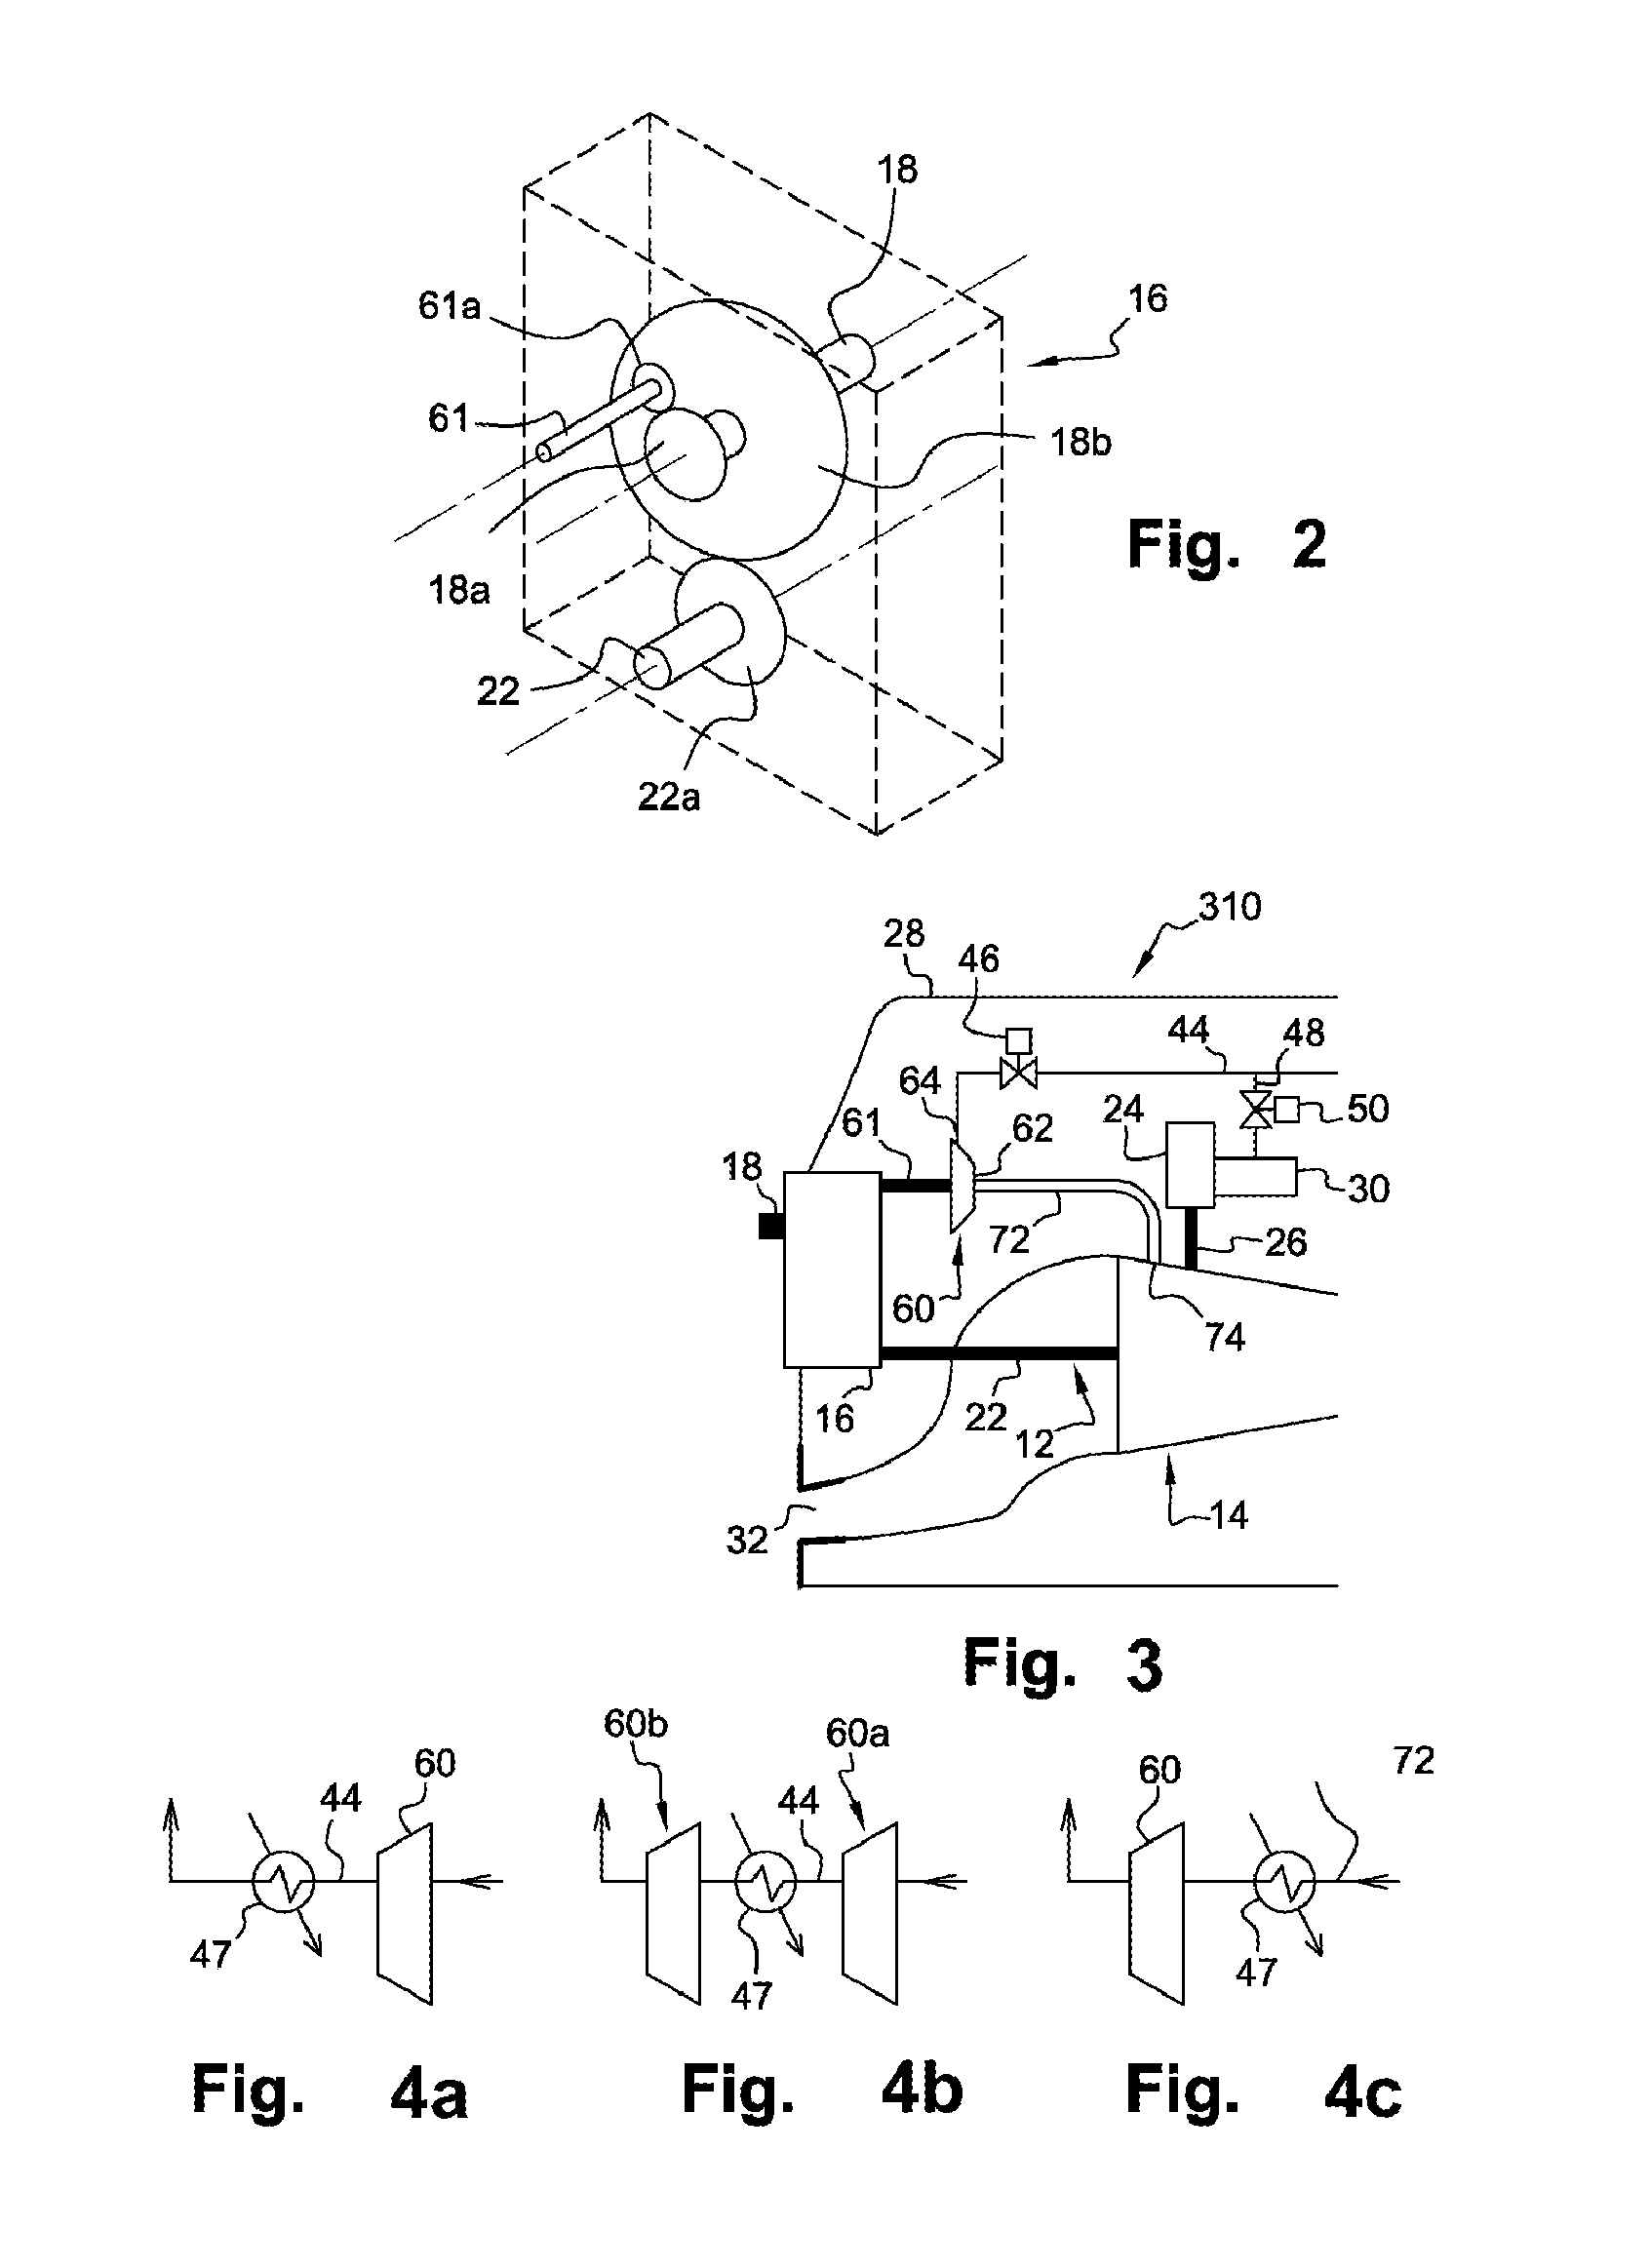 Supply of air to an air-conditioning circuit of an aircraft cabin from its turboprop engine